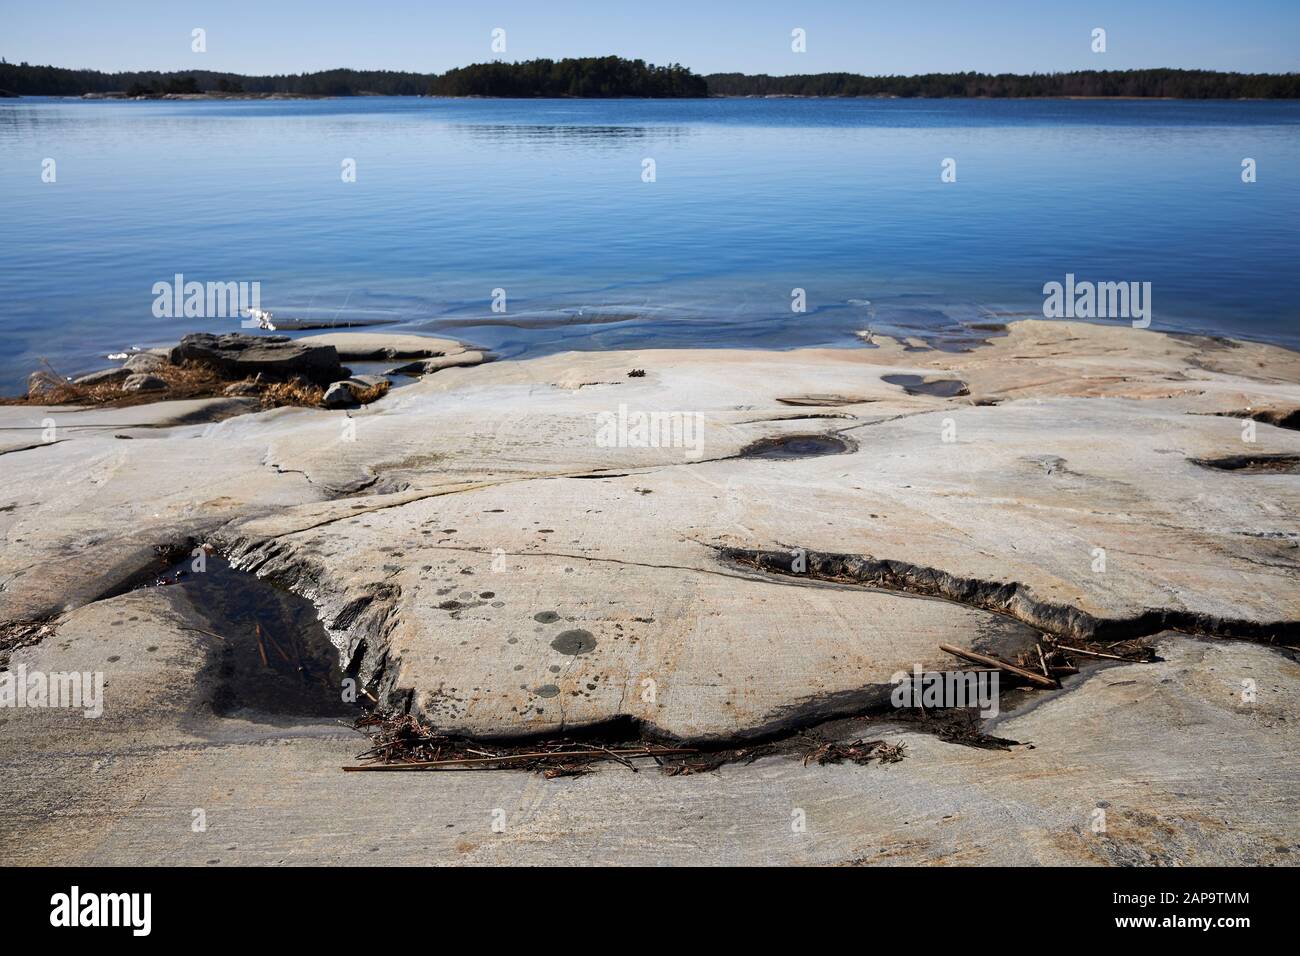 Peaceful summer landscape by the Baltic Sea in Kasnas, Kemio, Finland. Wide angle shot of the rocks on the seashore at Finnish archipelago. Stock Photo